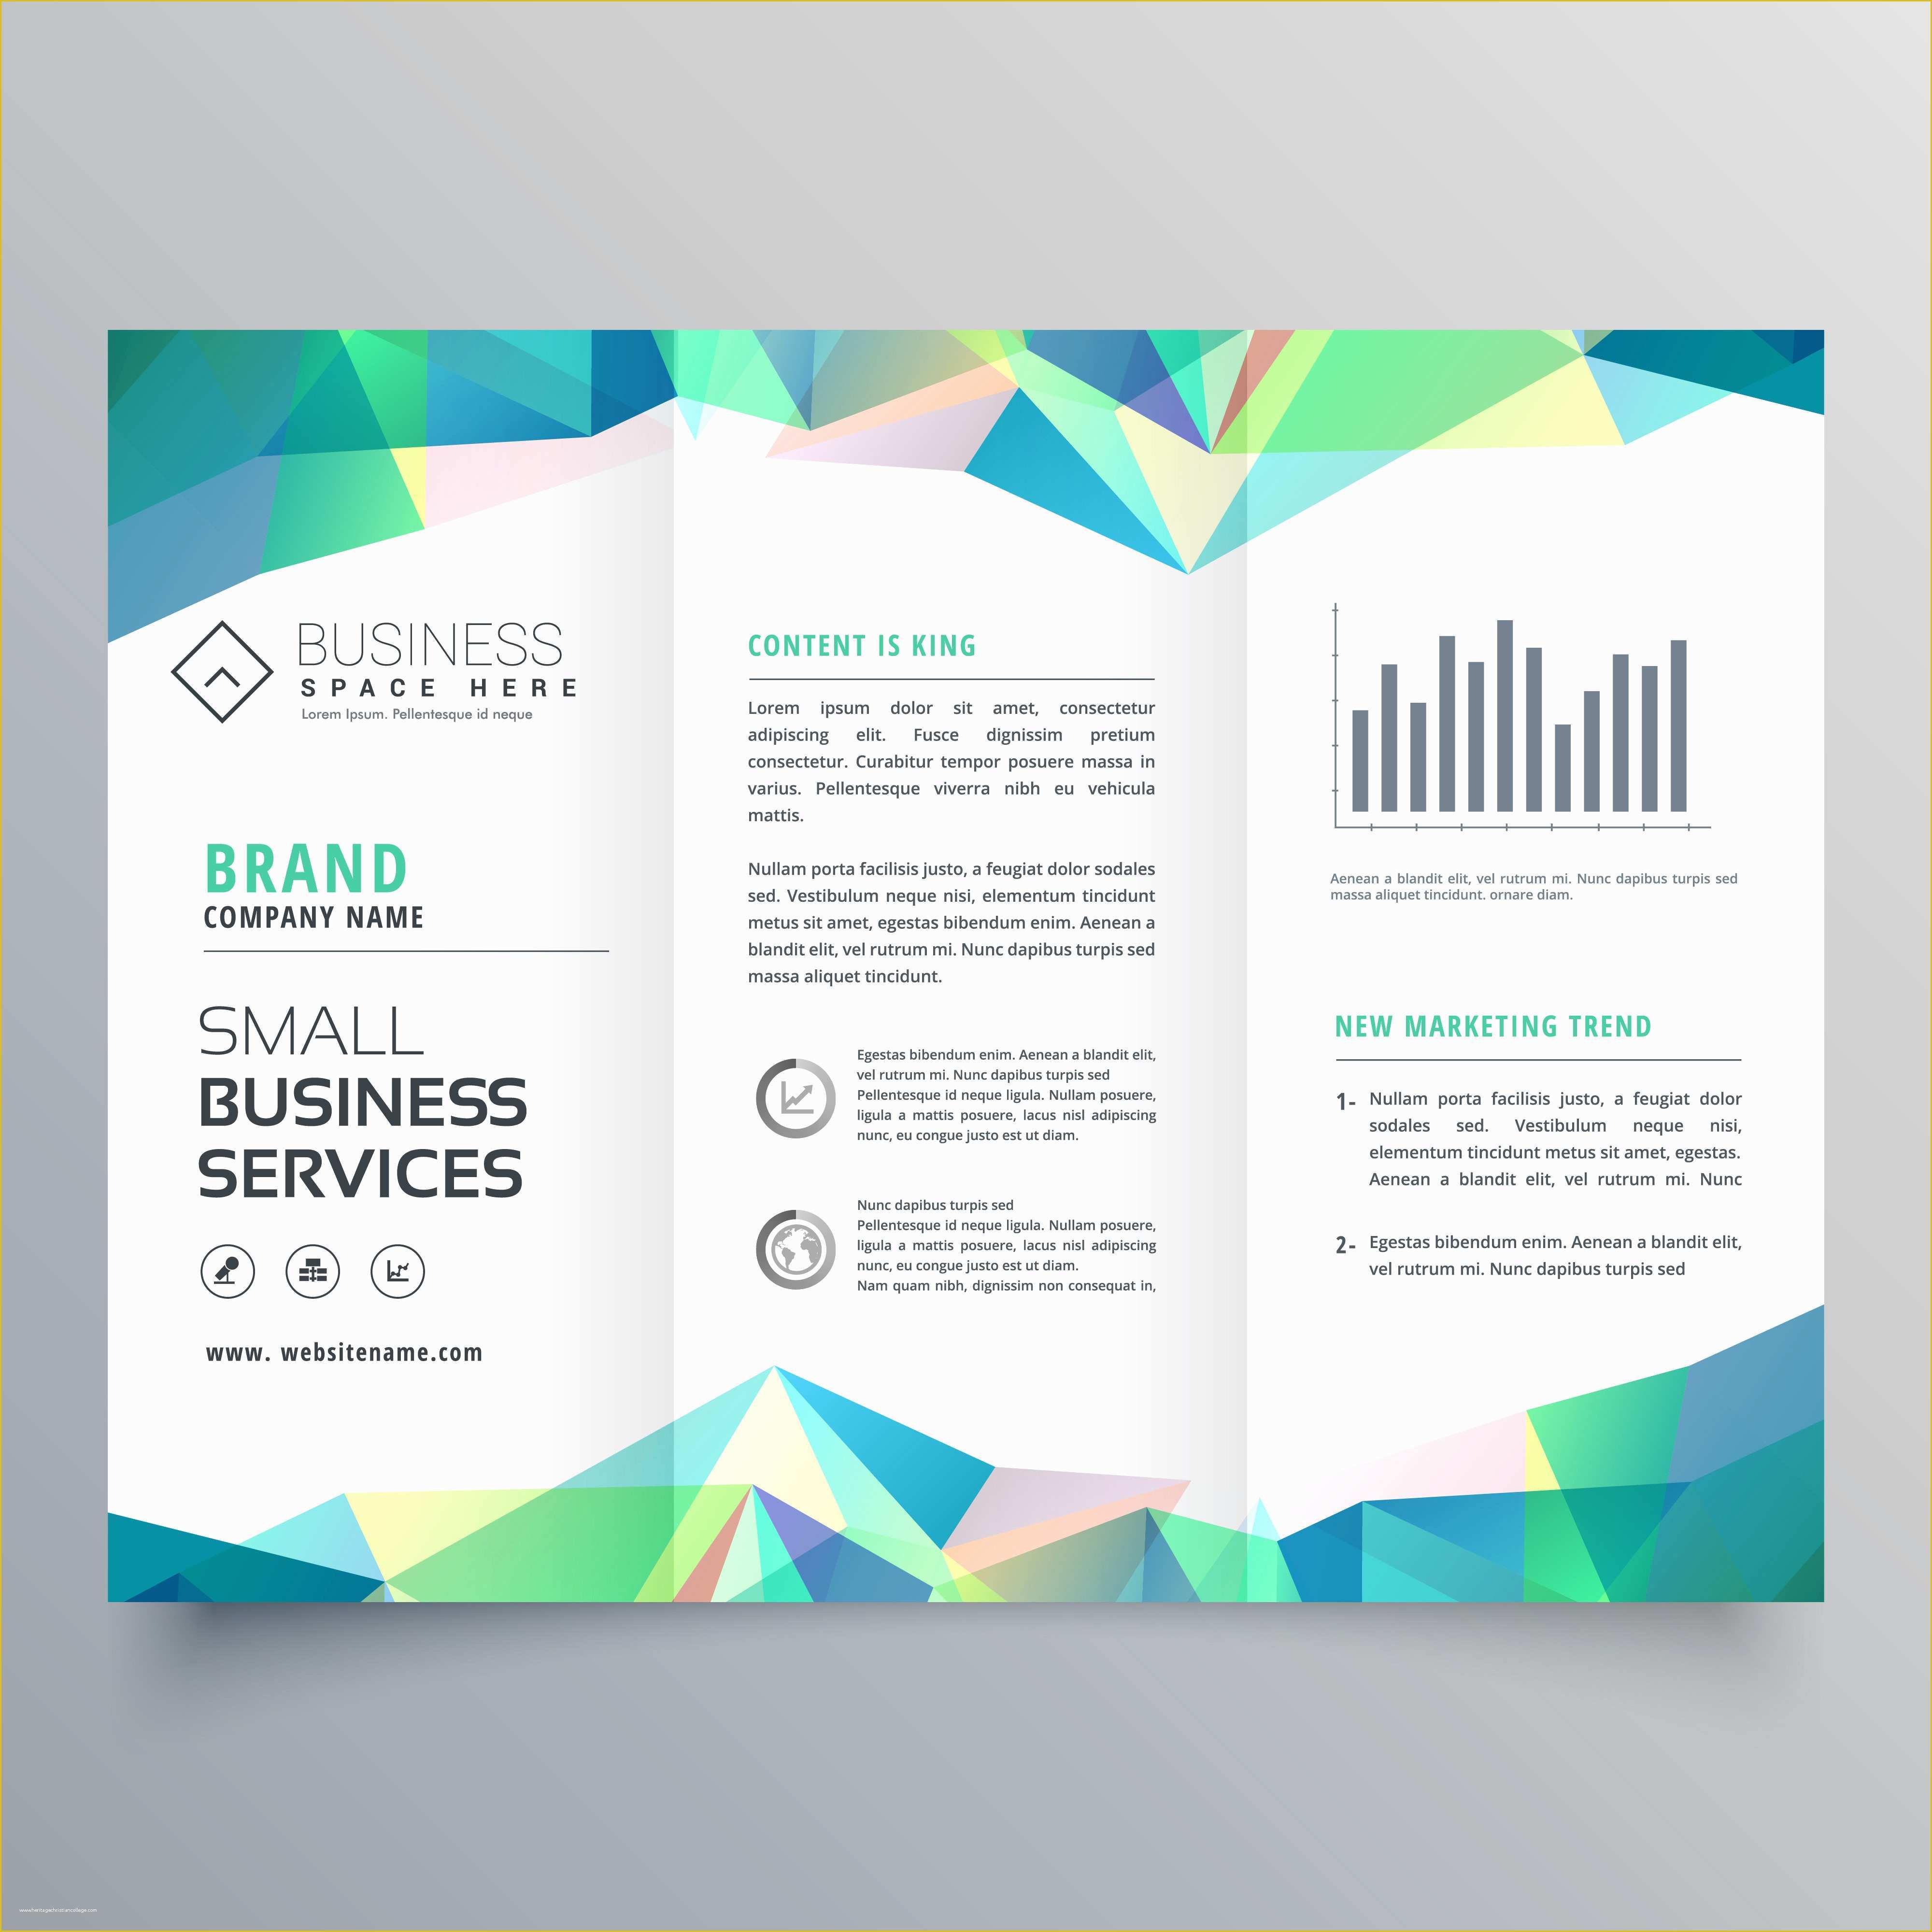 Business Prospectus Template Free Of Business Trifold Brochure Design with Abstract Shapes